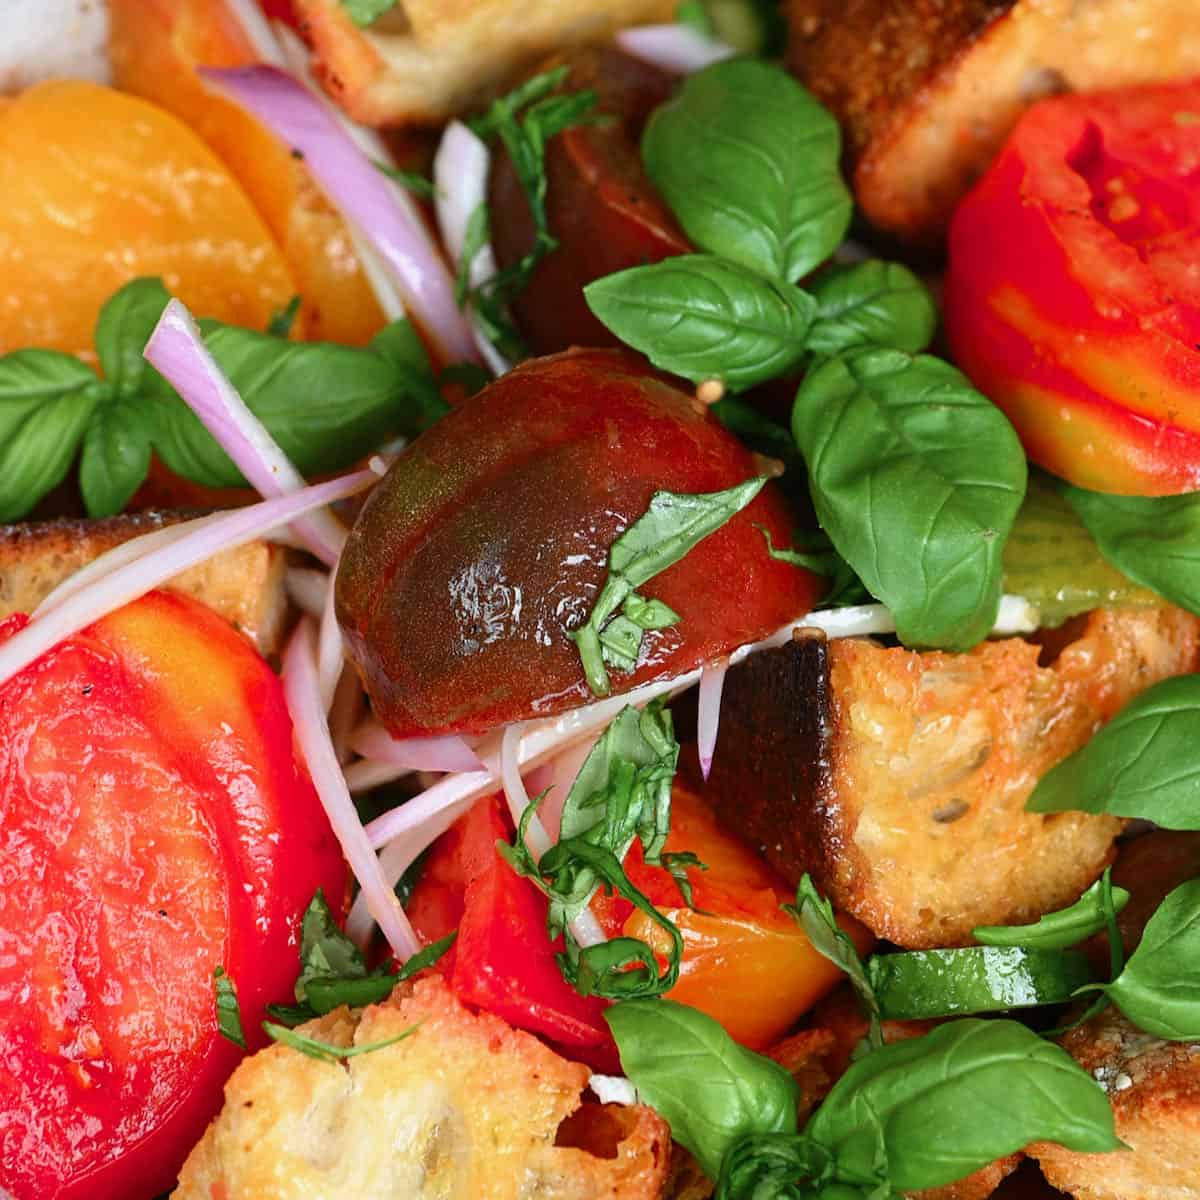 Panzanella salad topped with basil leaves